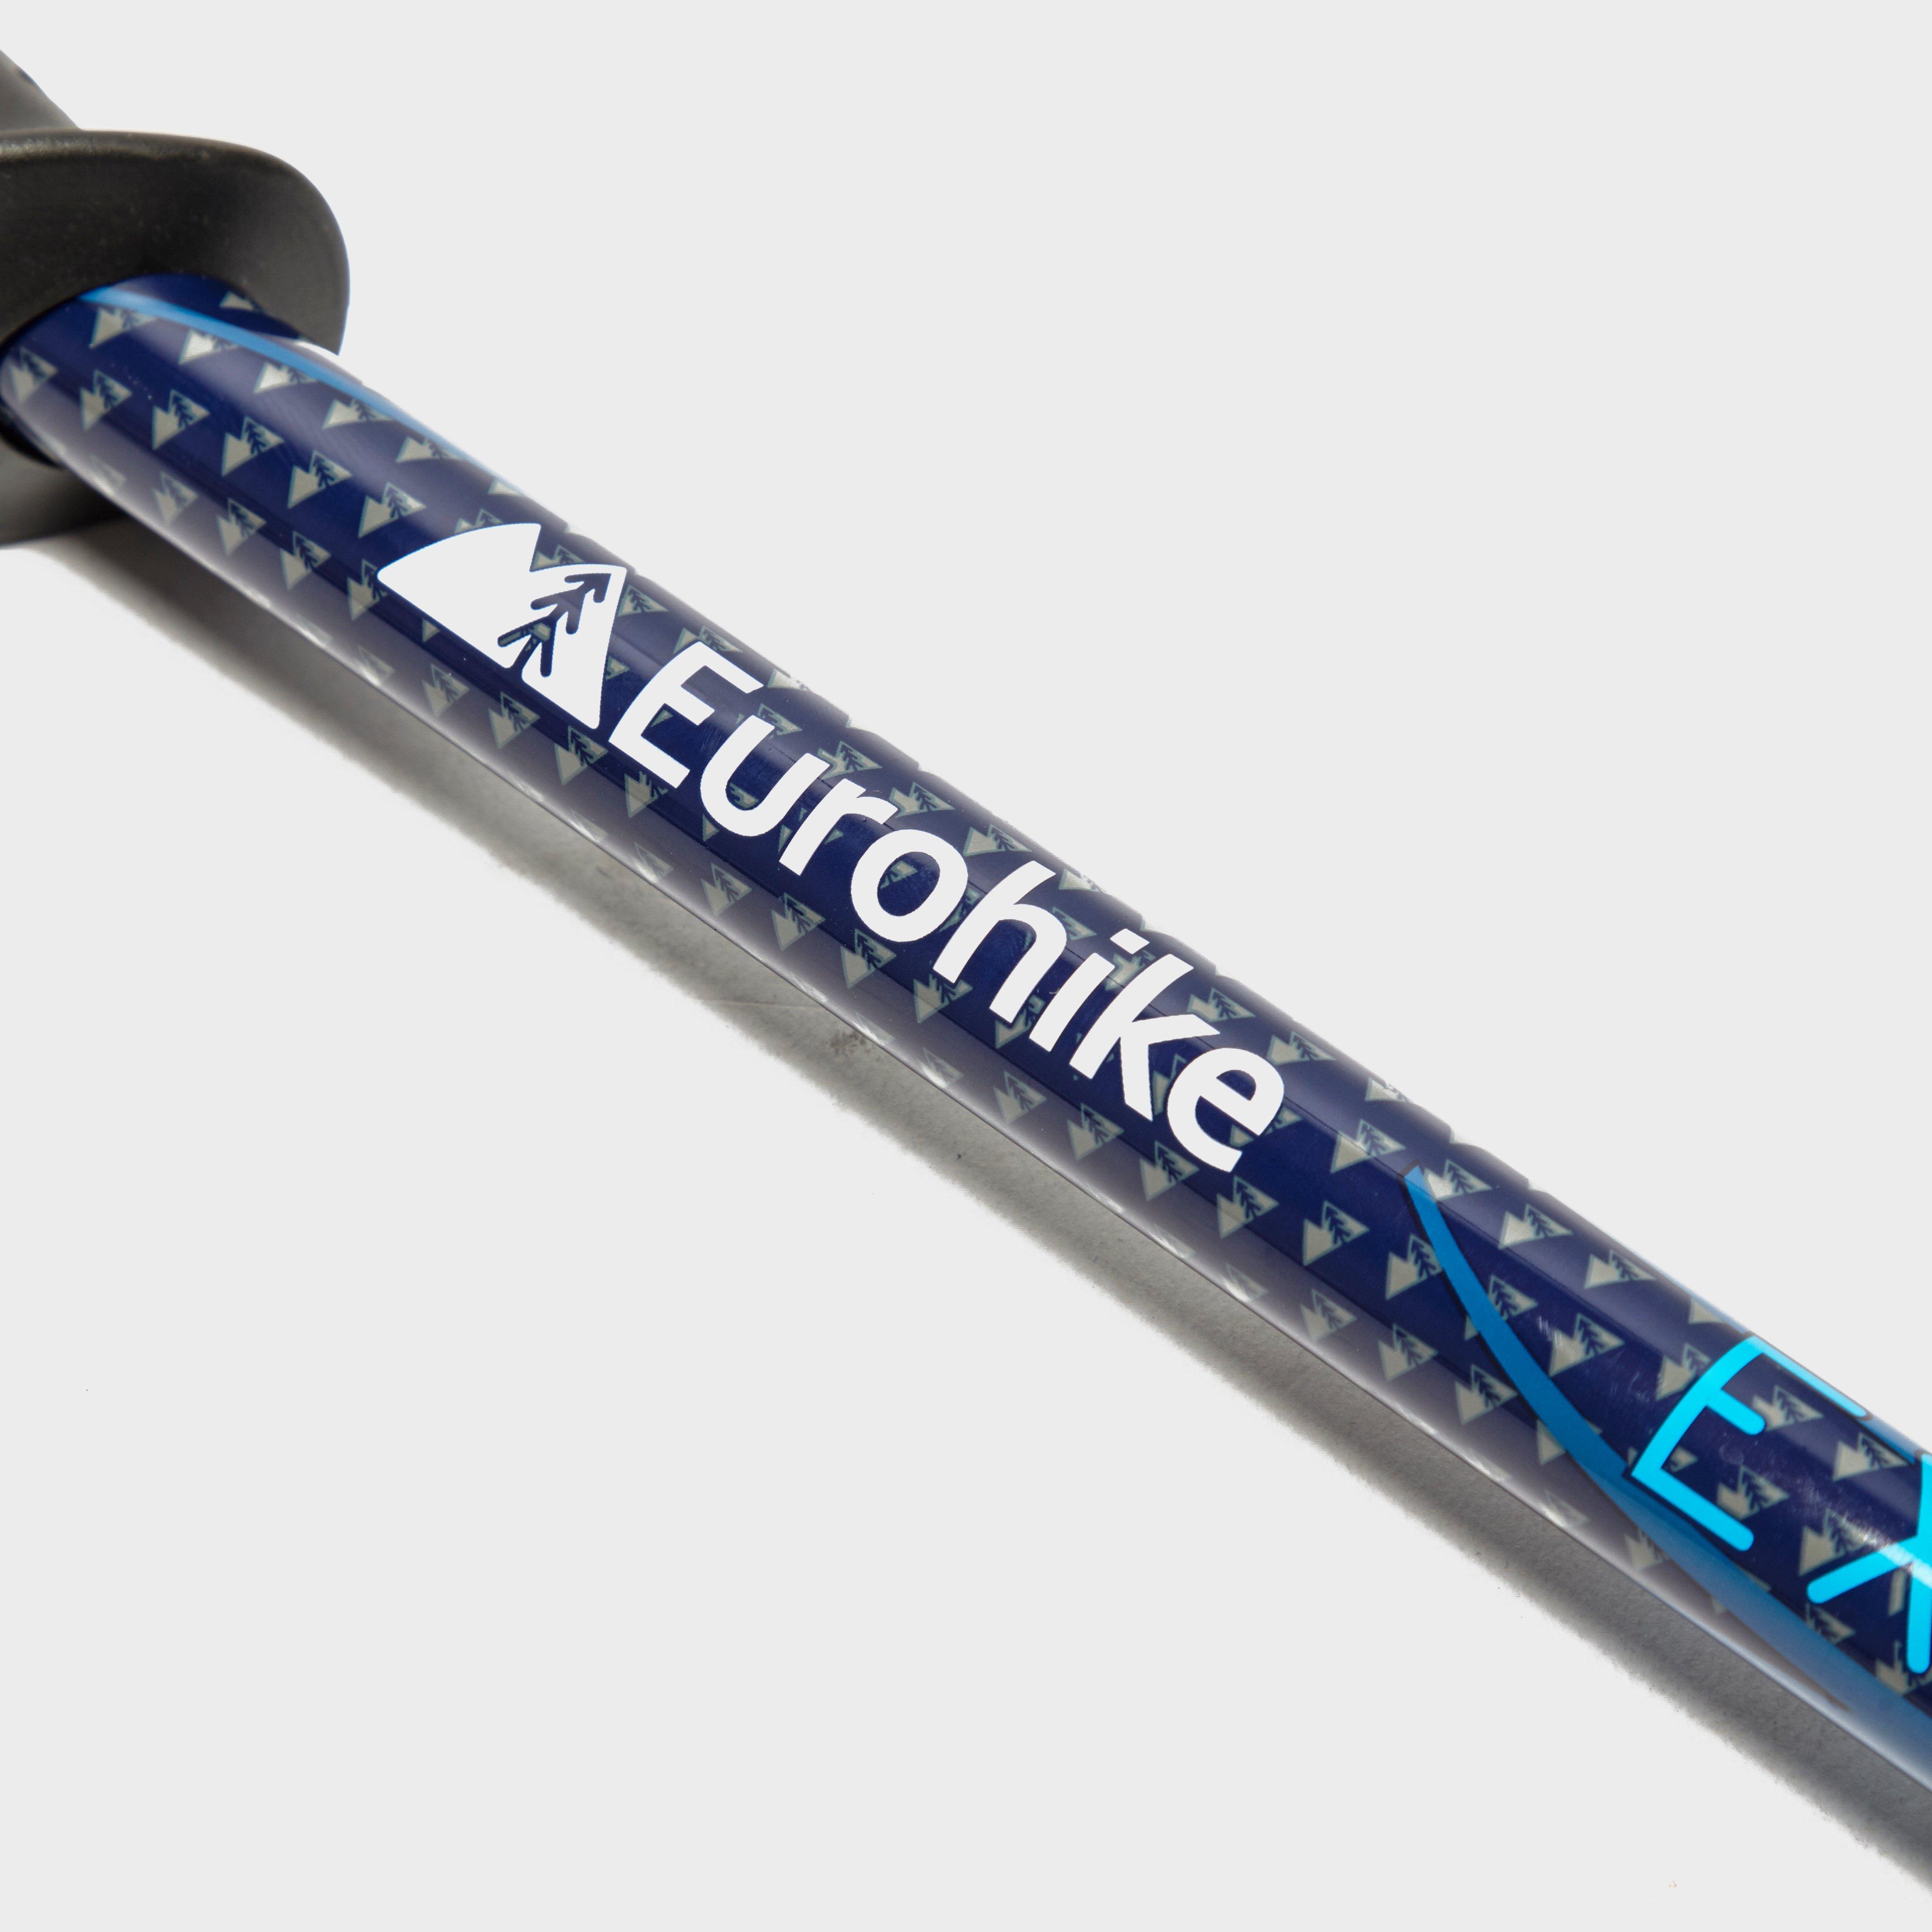 Eurohike Expedition Anti-Shock Walking Pole Review